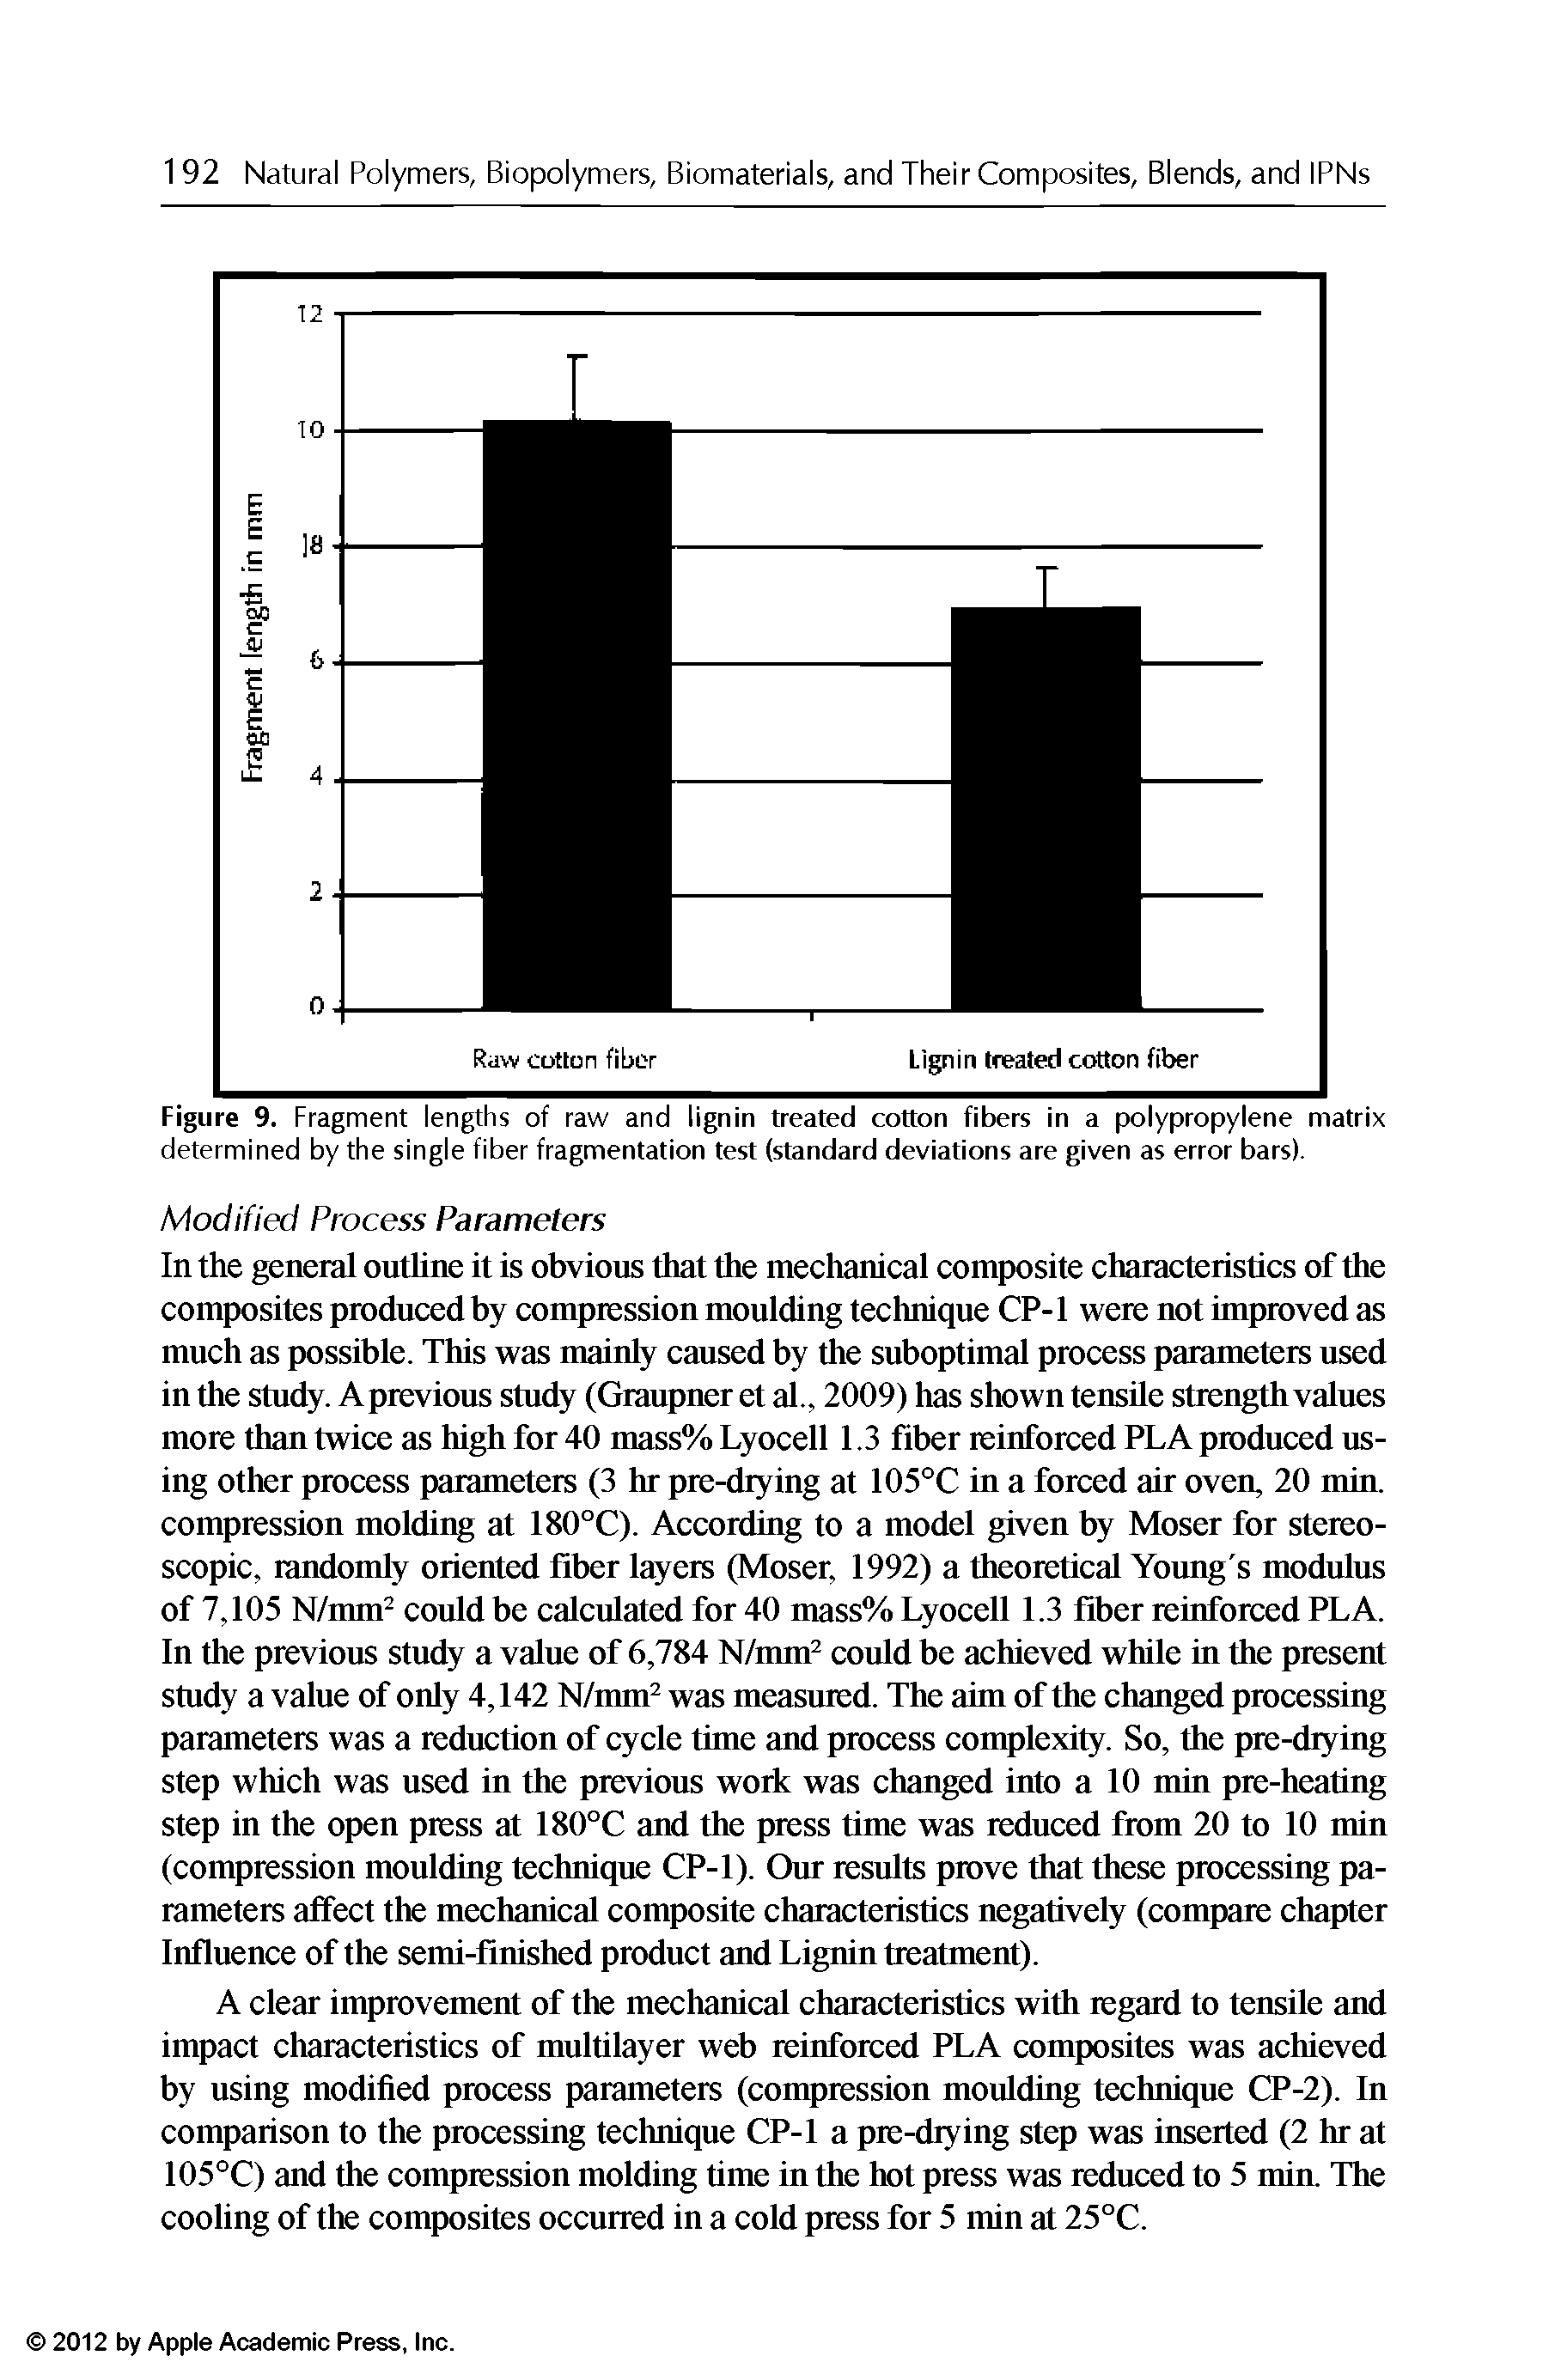 Figure 9. Fragment lengths of raw and lignin treated cotton fibers in a polypropylene matrix determined by the single fiber fragmentation test (standard deviations are given as error bars).